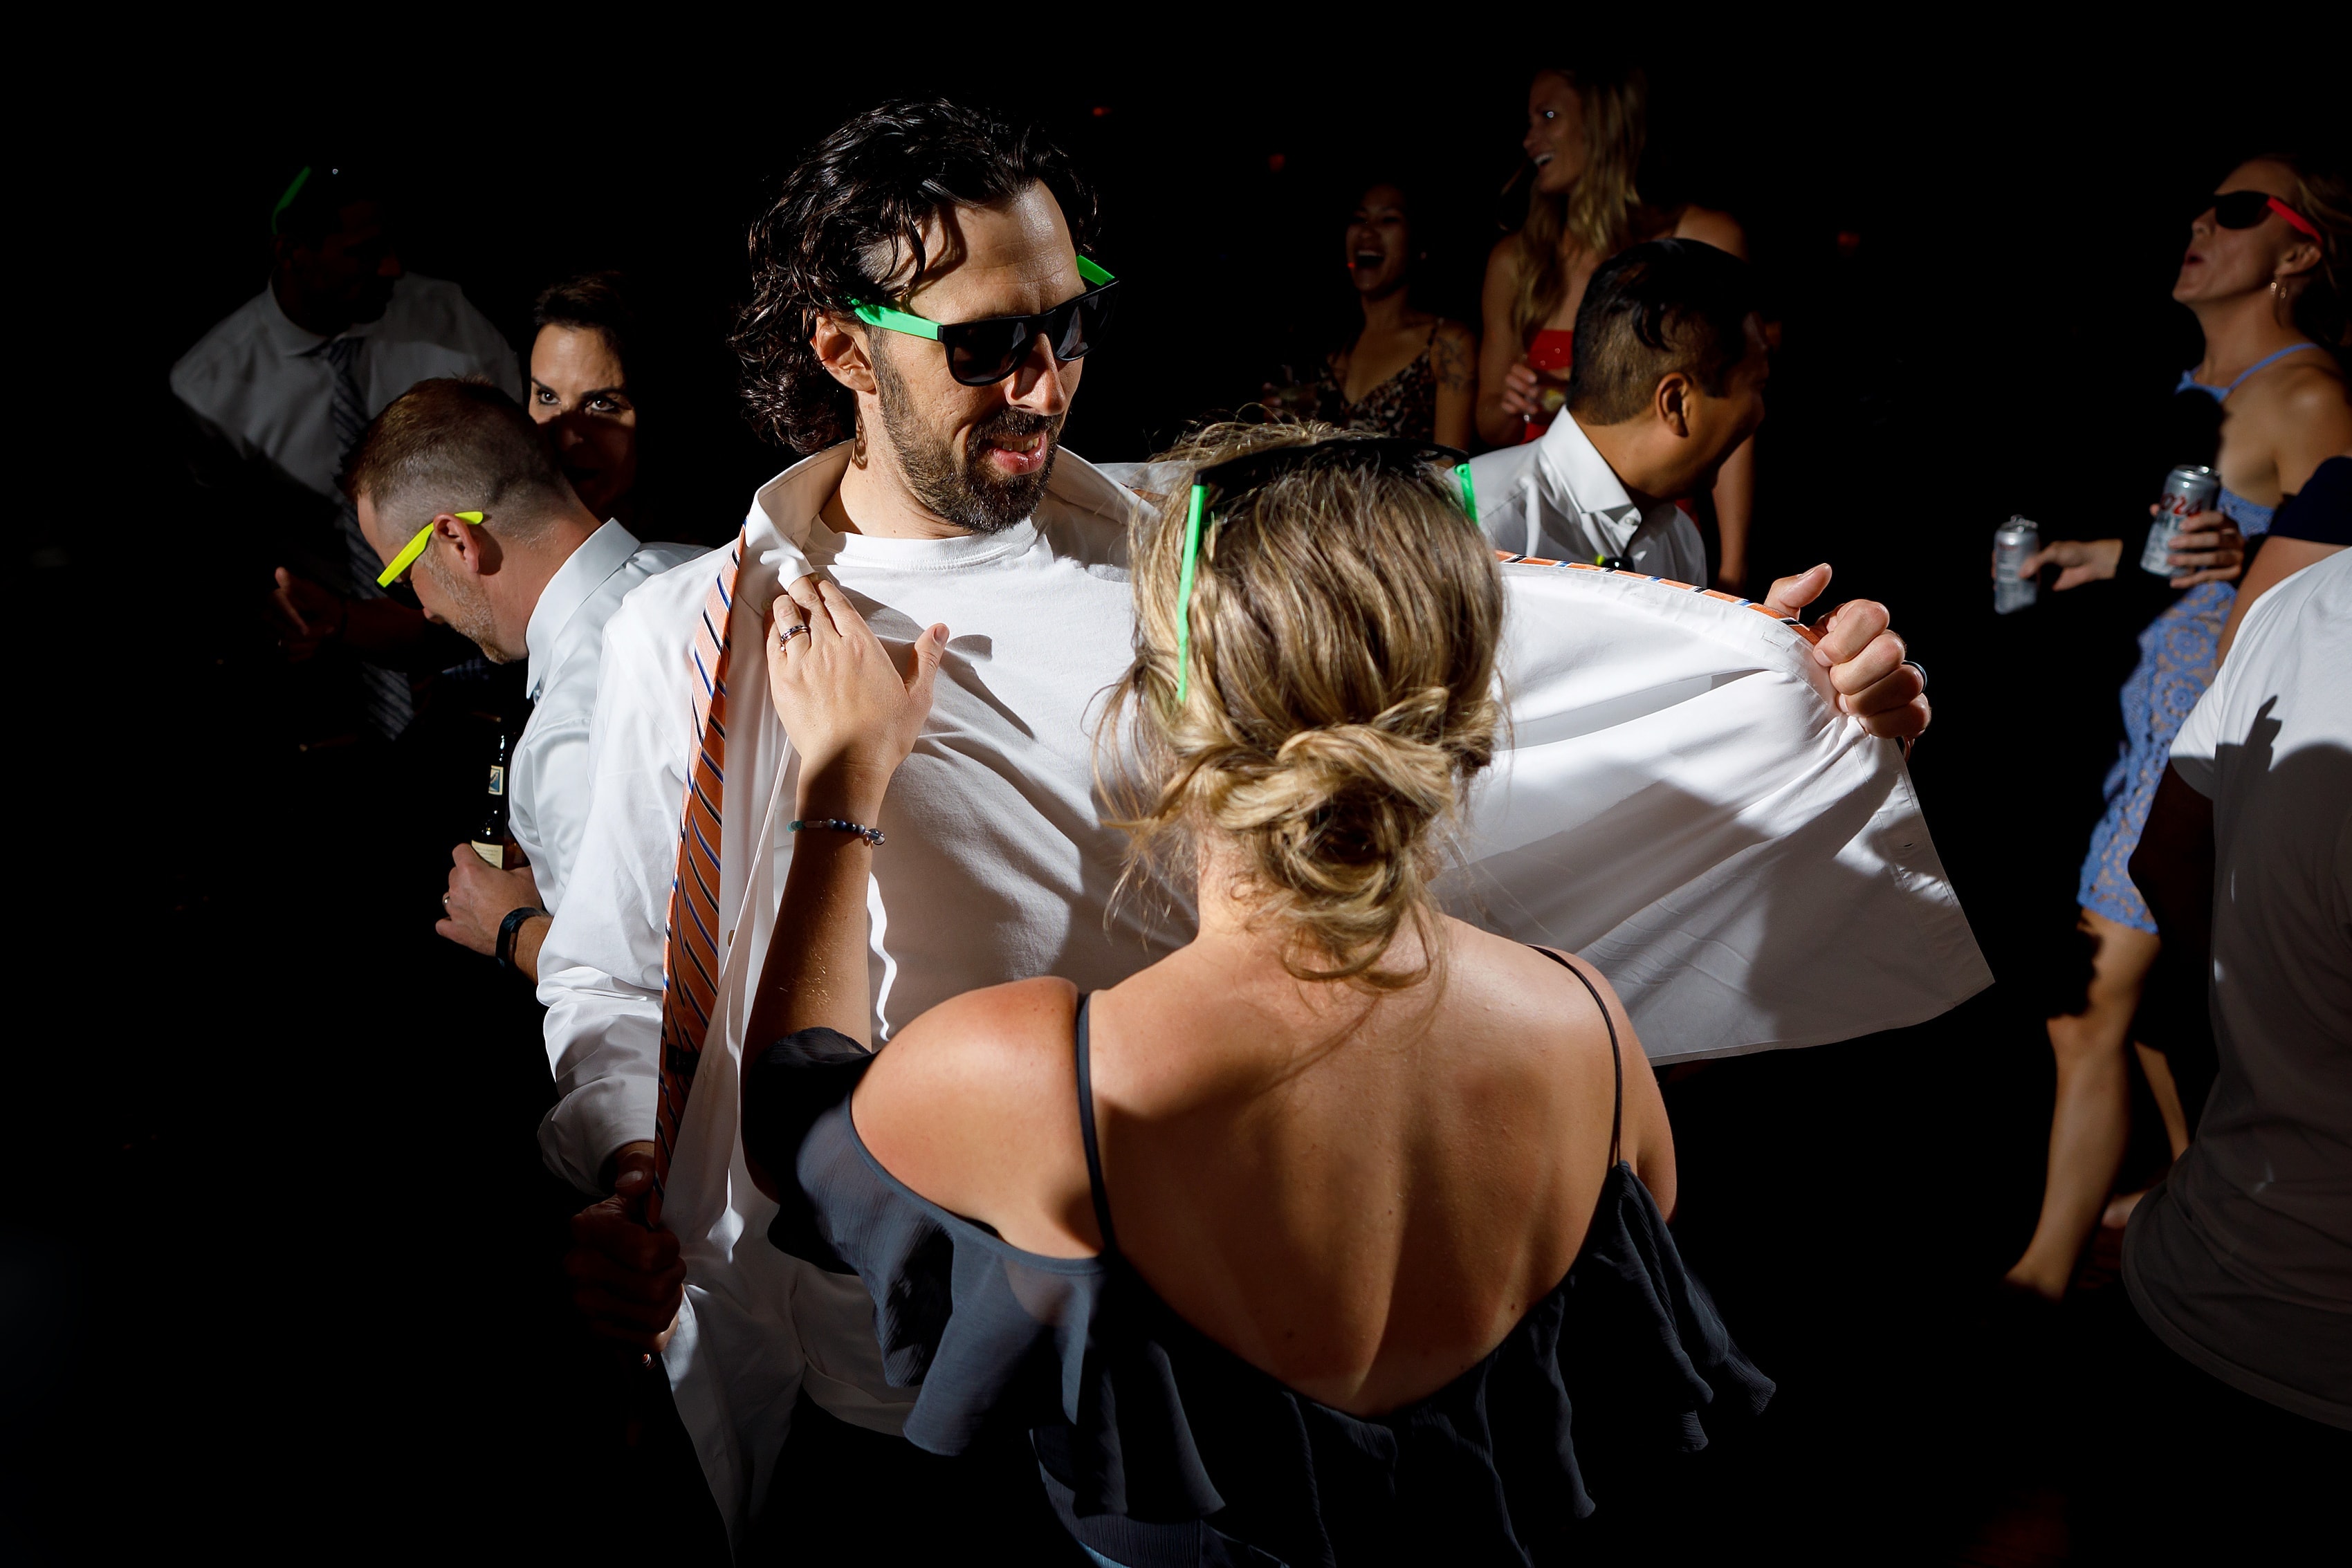 wedding guests dance during wedding reception at Lionsgate Event Center